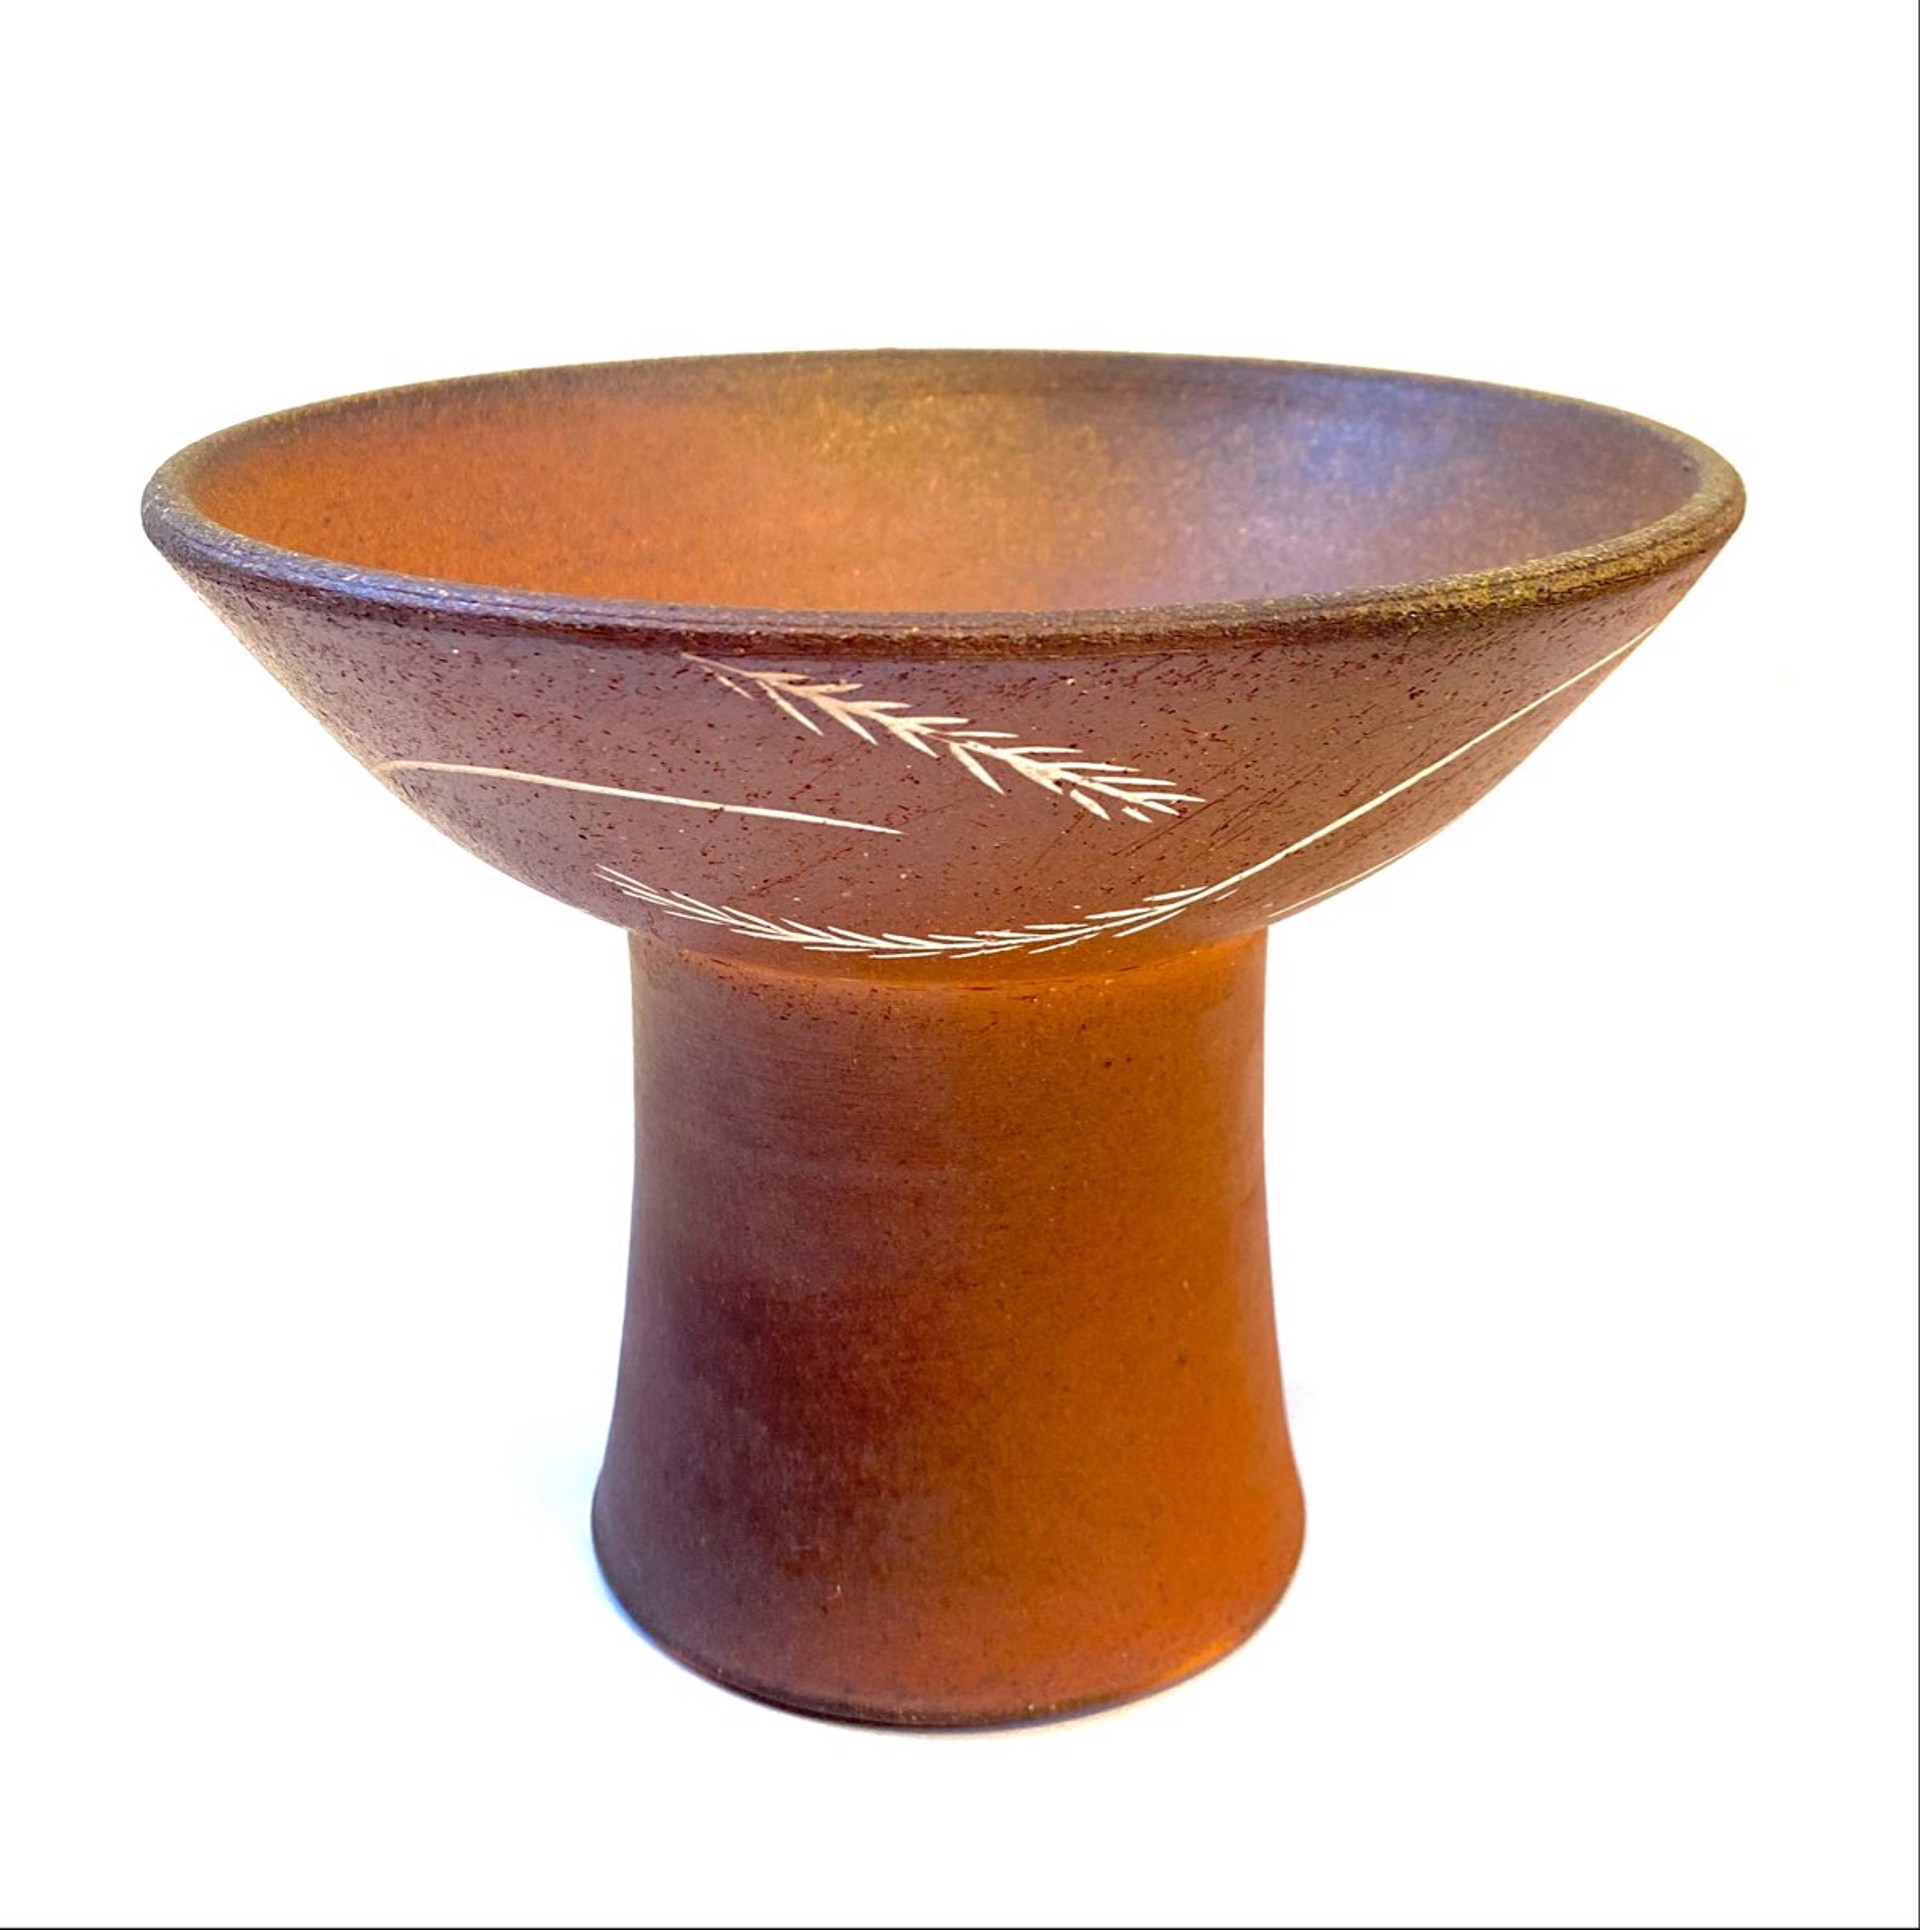 Celadon Stoneware Pedestal Bowl with Mishima Decoration by Mitch Yung